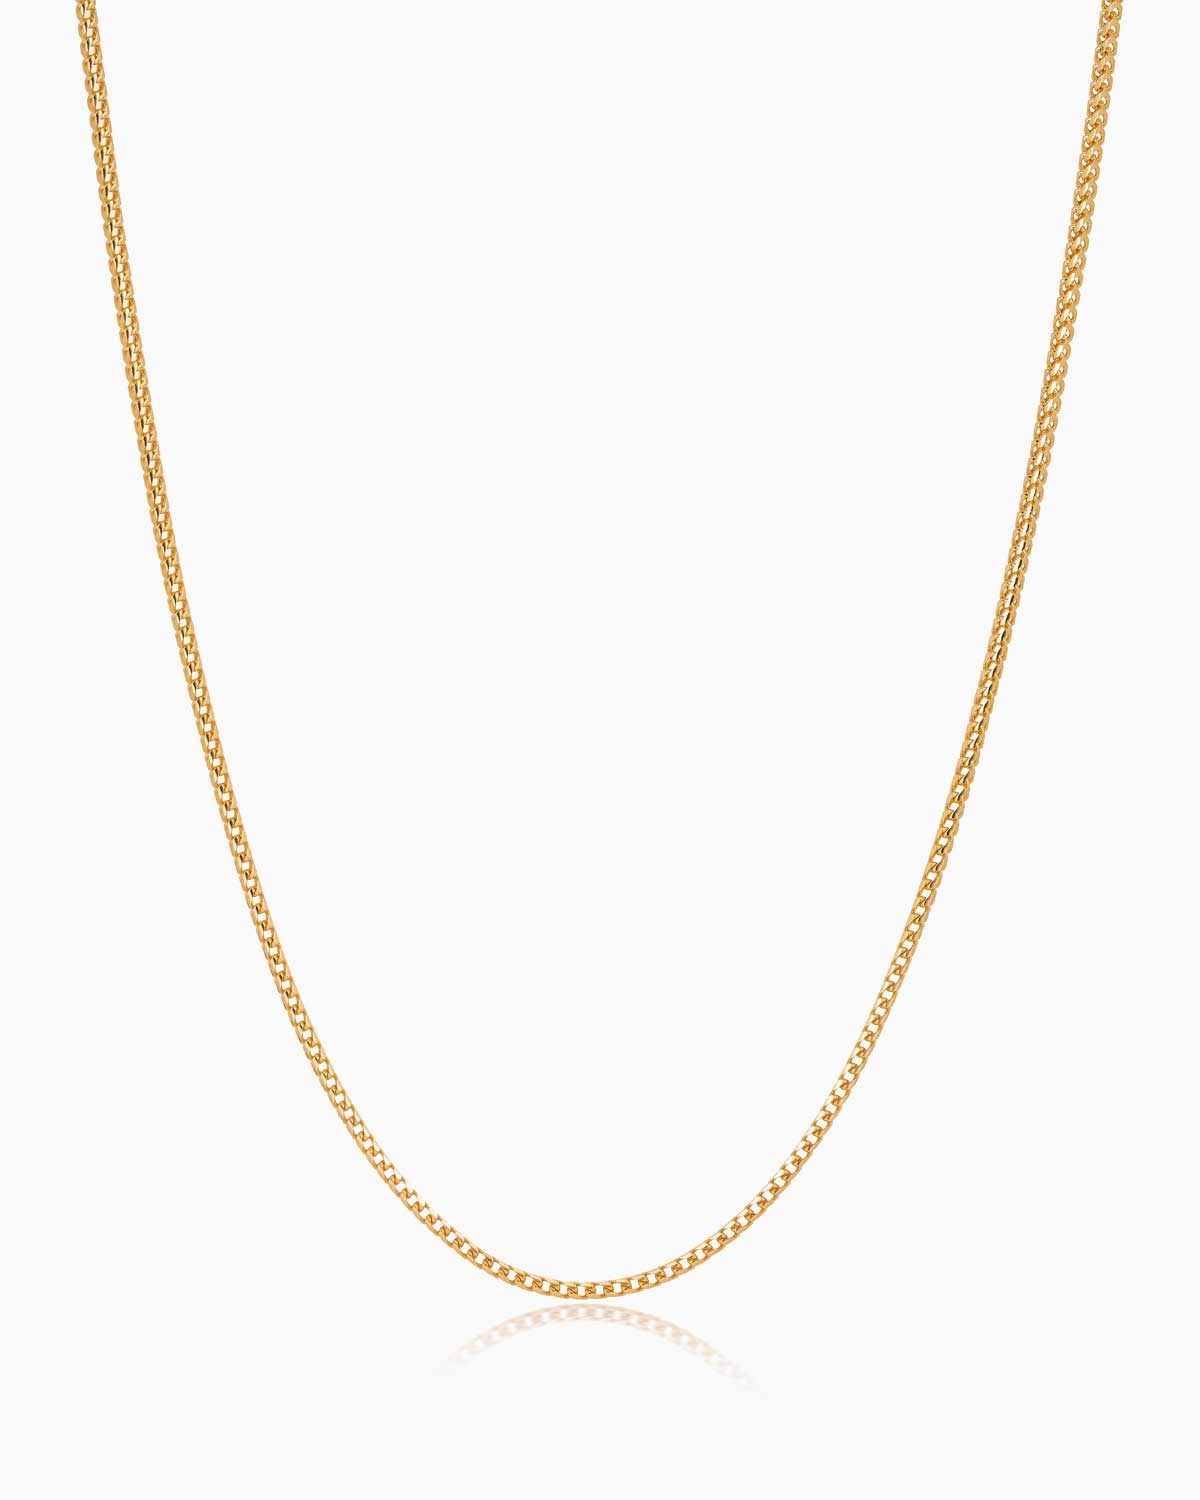 18 karat yellow gold freya link chain by claude and me jewellery